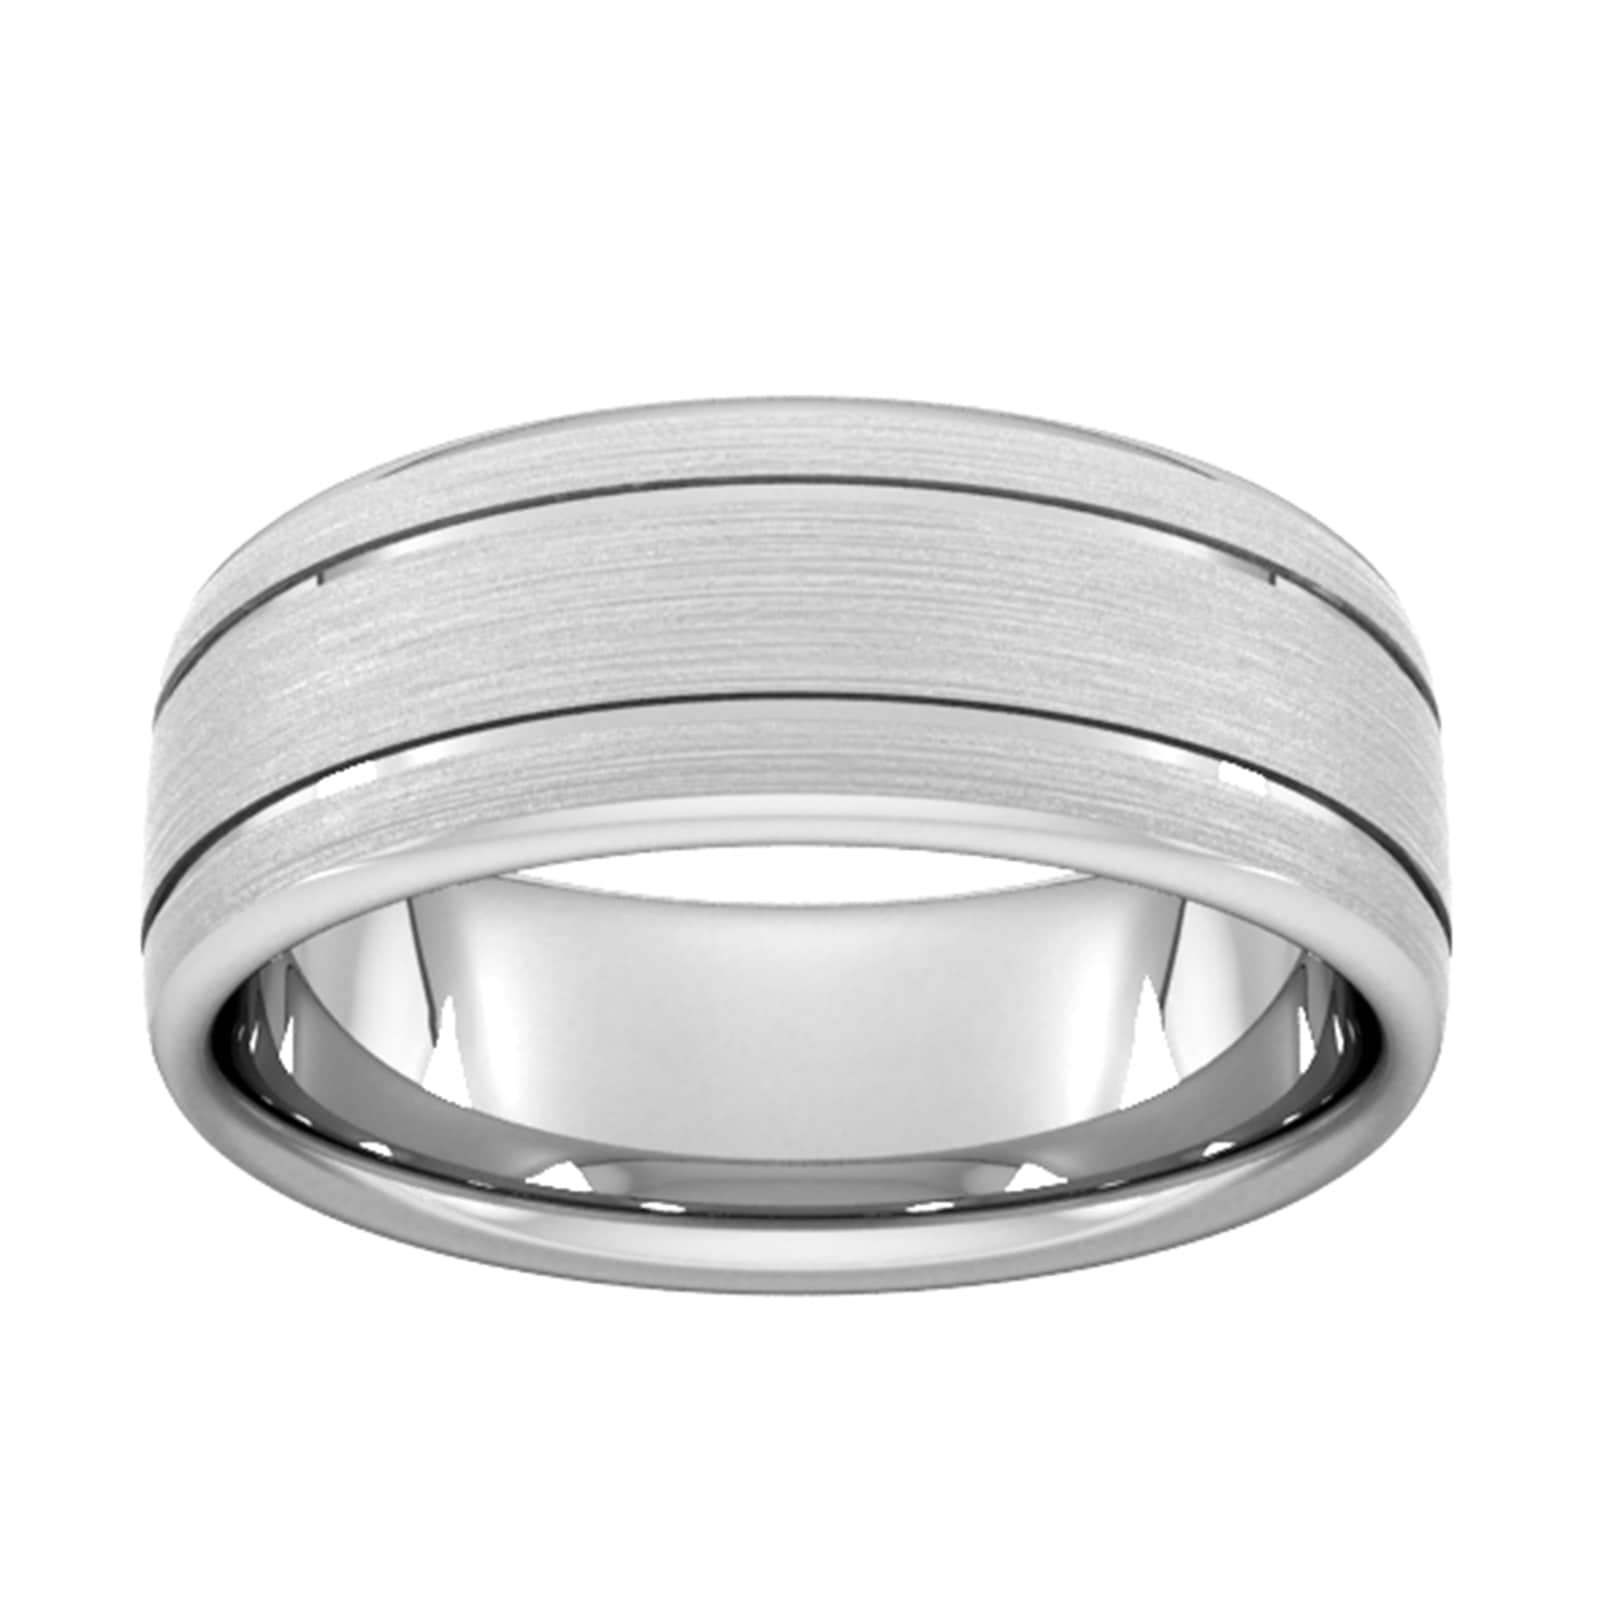 8mm Slight Court Standard Matt Finish With Double Grooves Wedding Ring In Platinum - Ring Size O